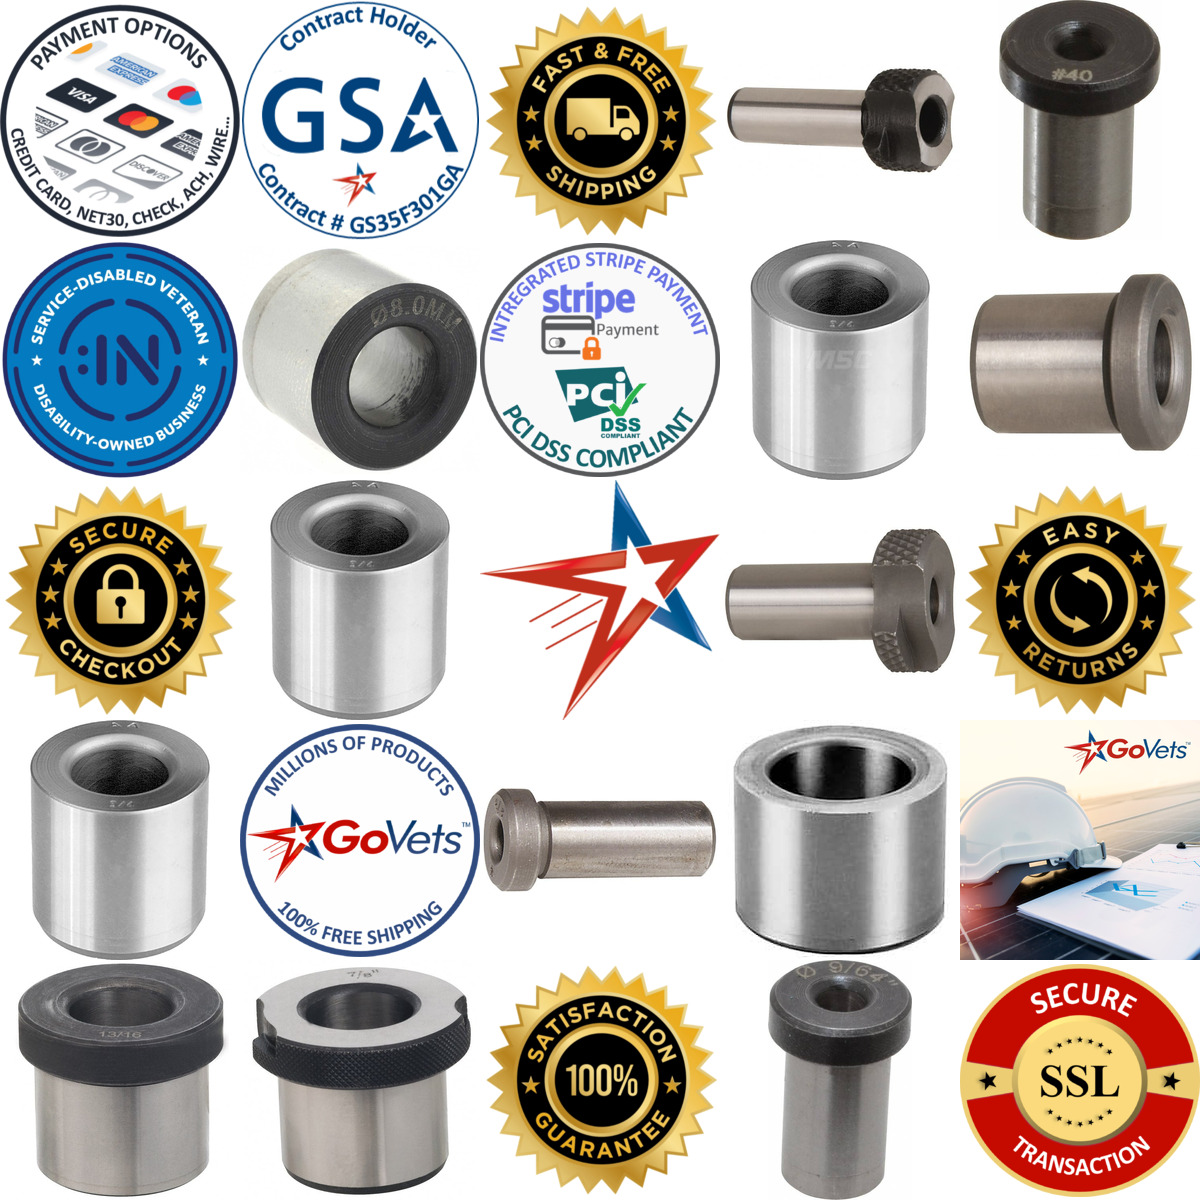 A selection of Drill Bushings products on GoVets